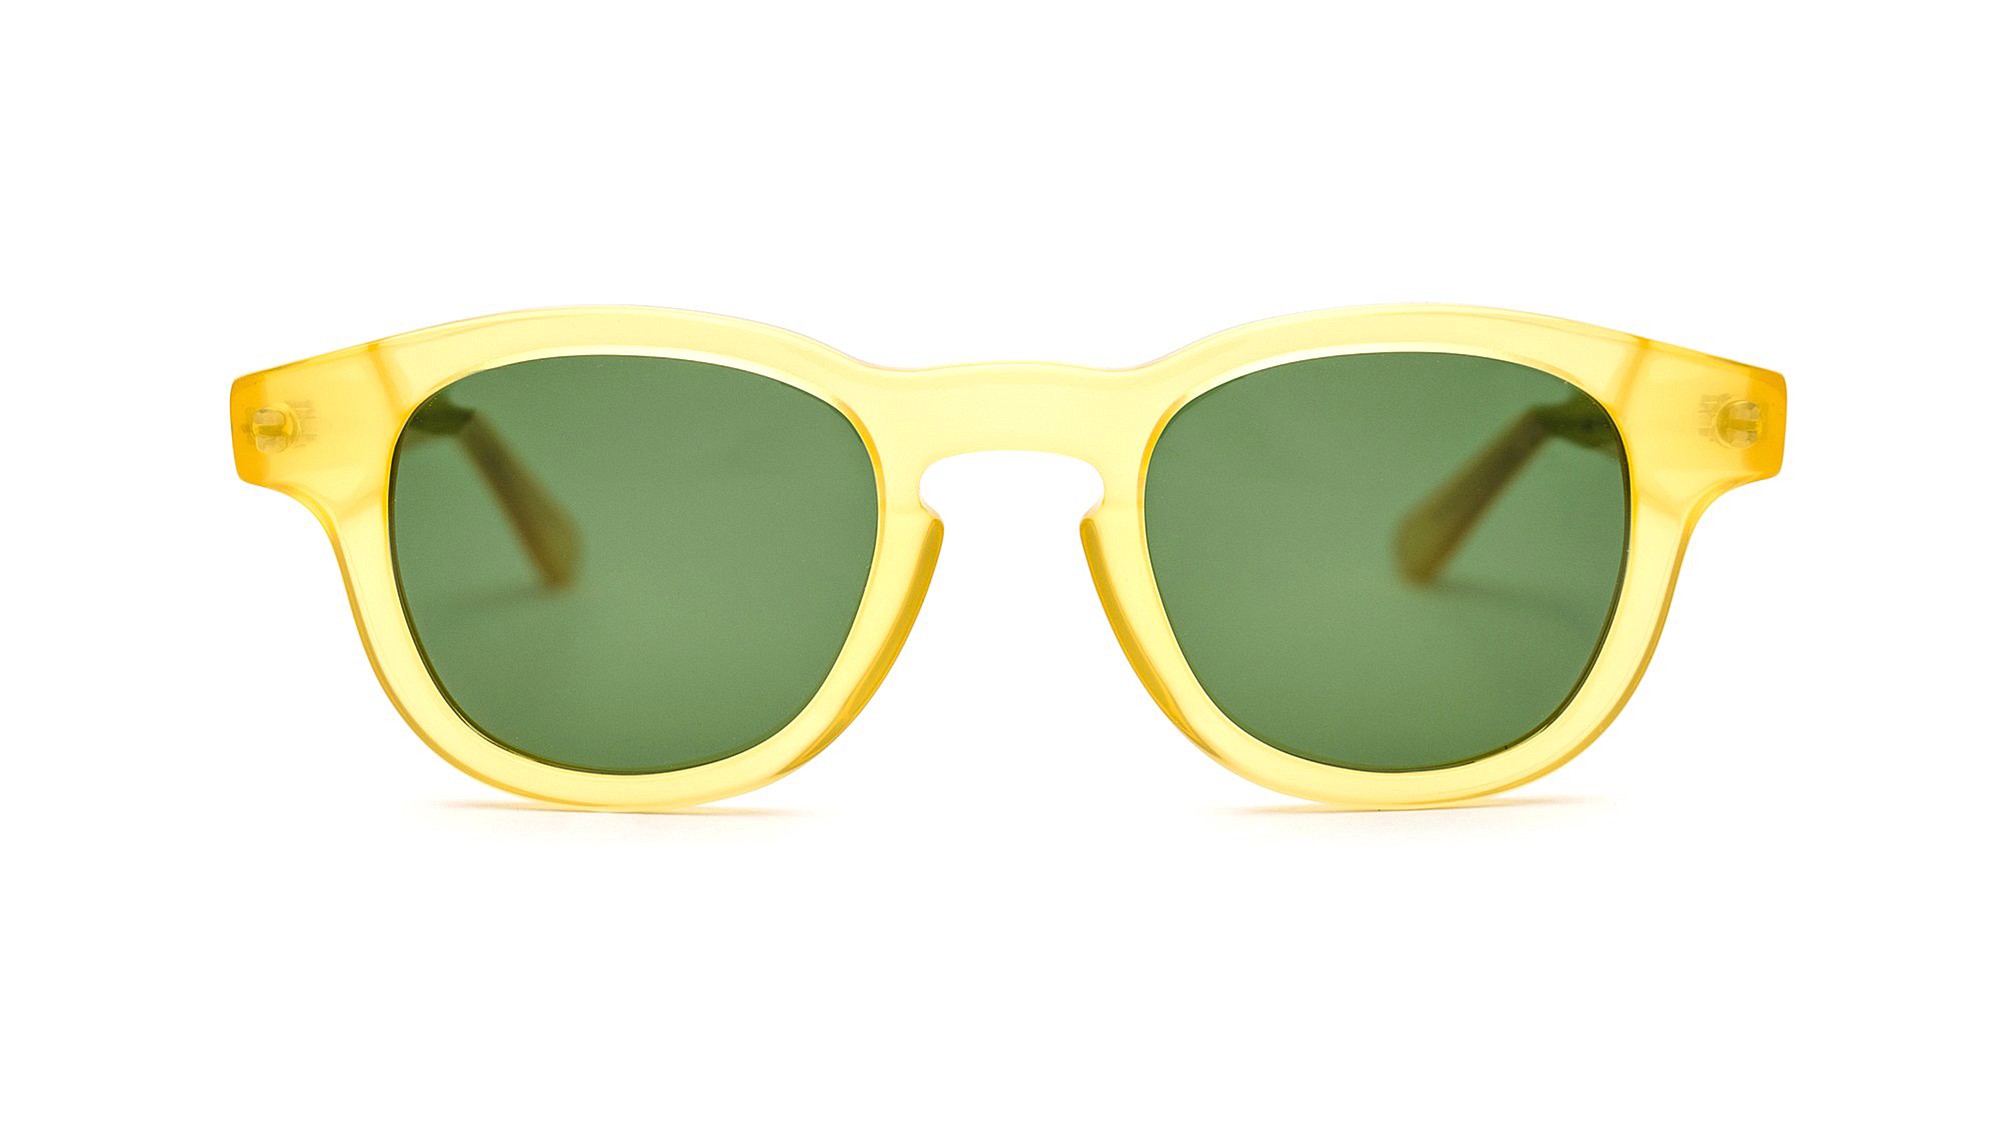 Quattrocento's Twice Ventura unisex sunglasses are available in a variety of colors.